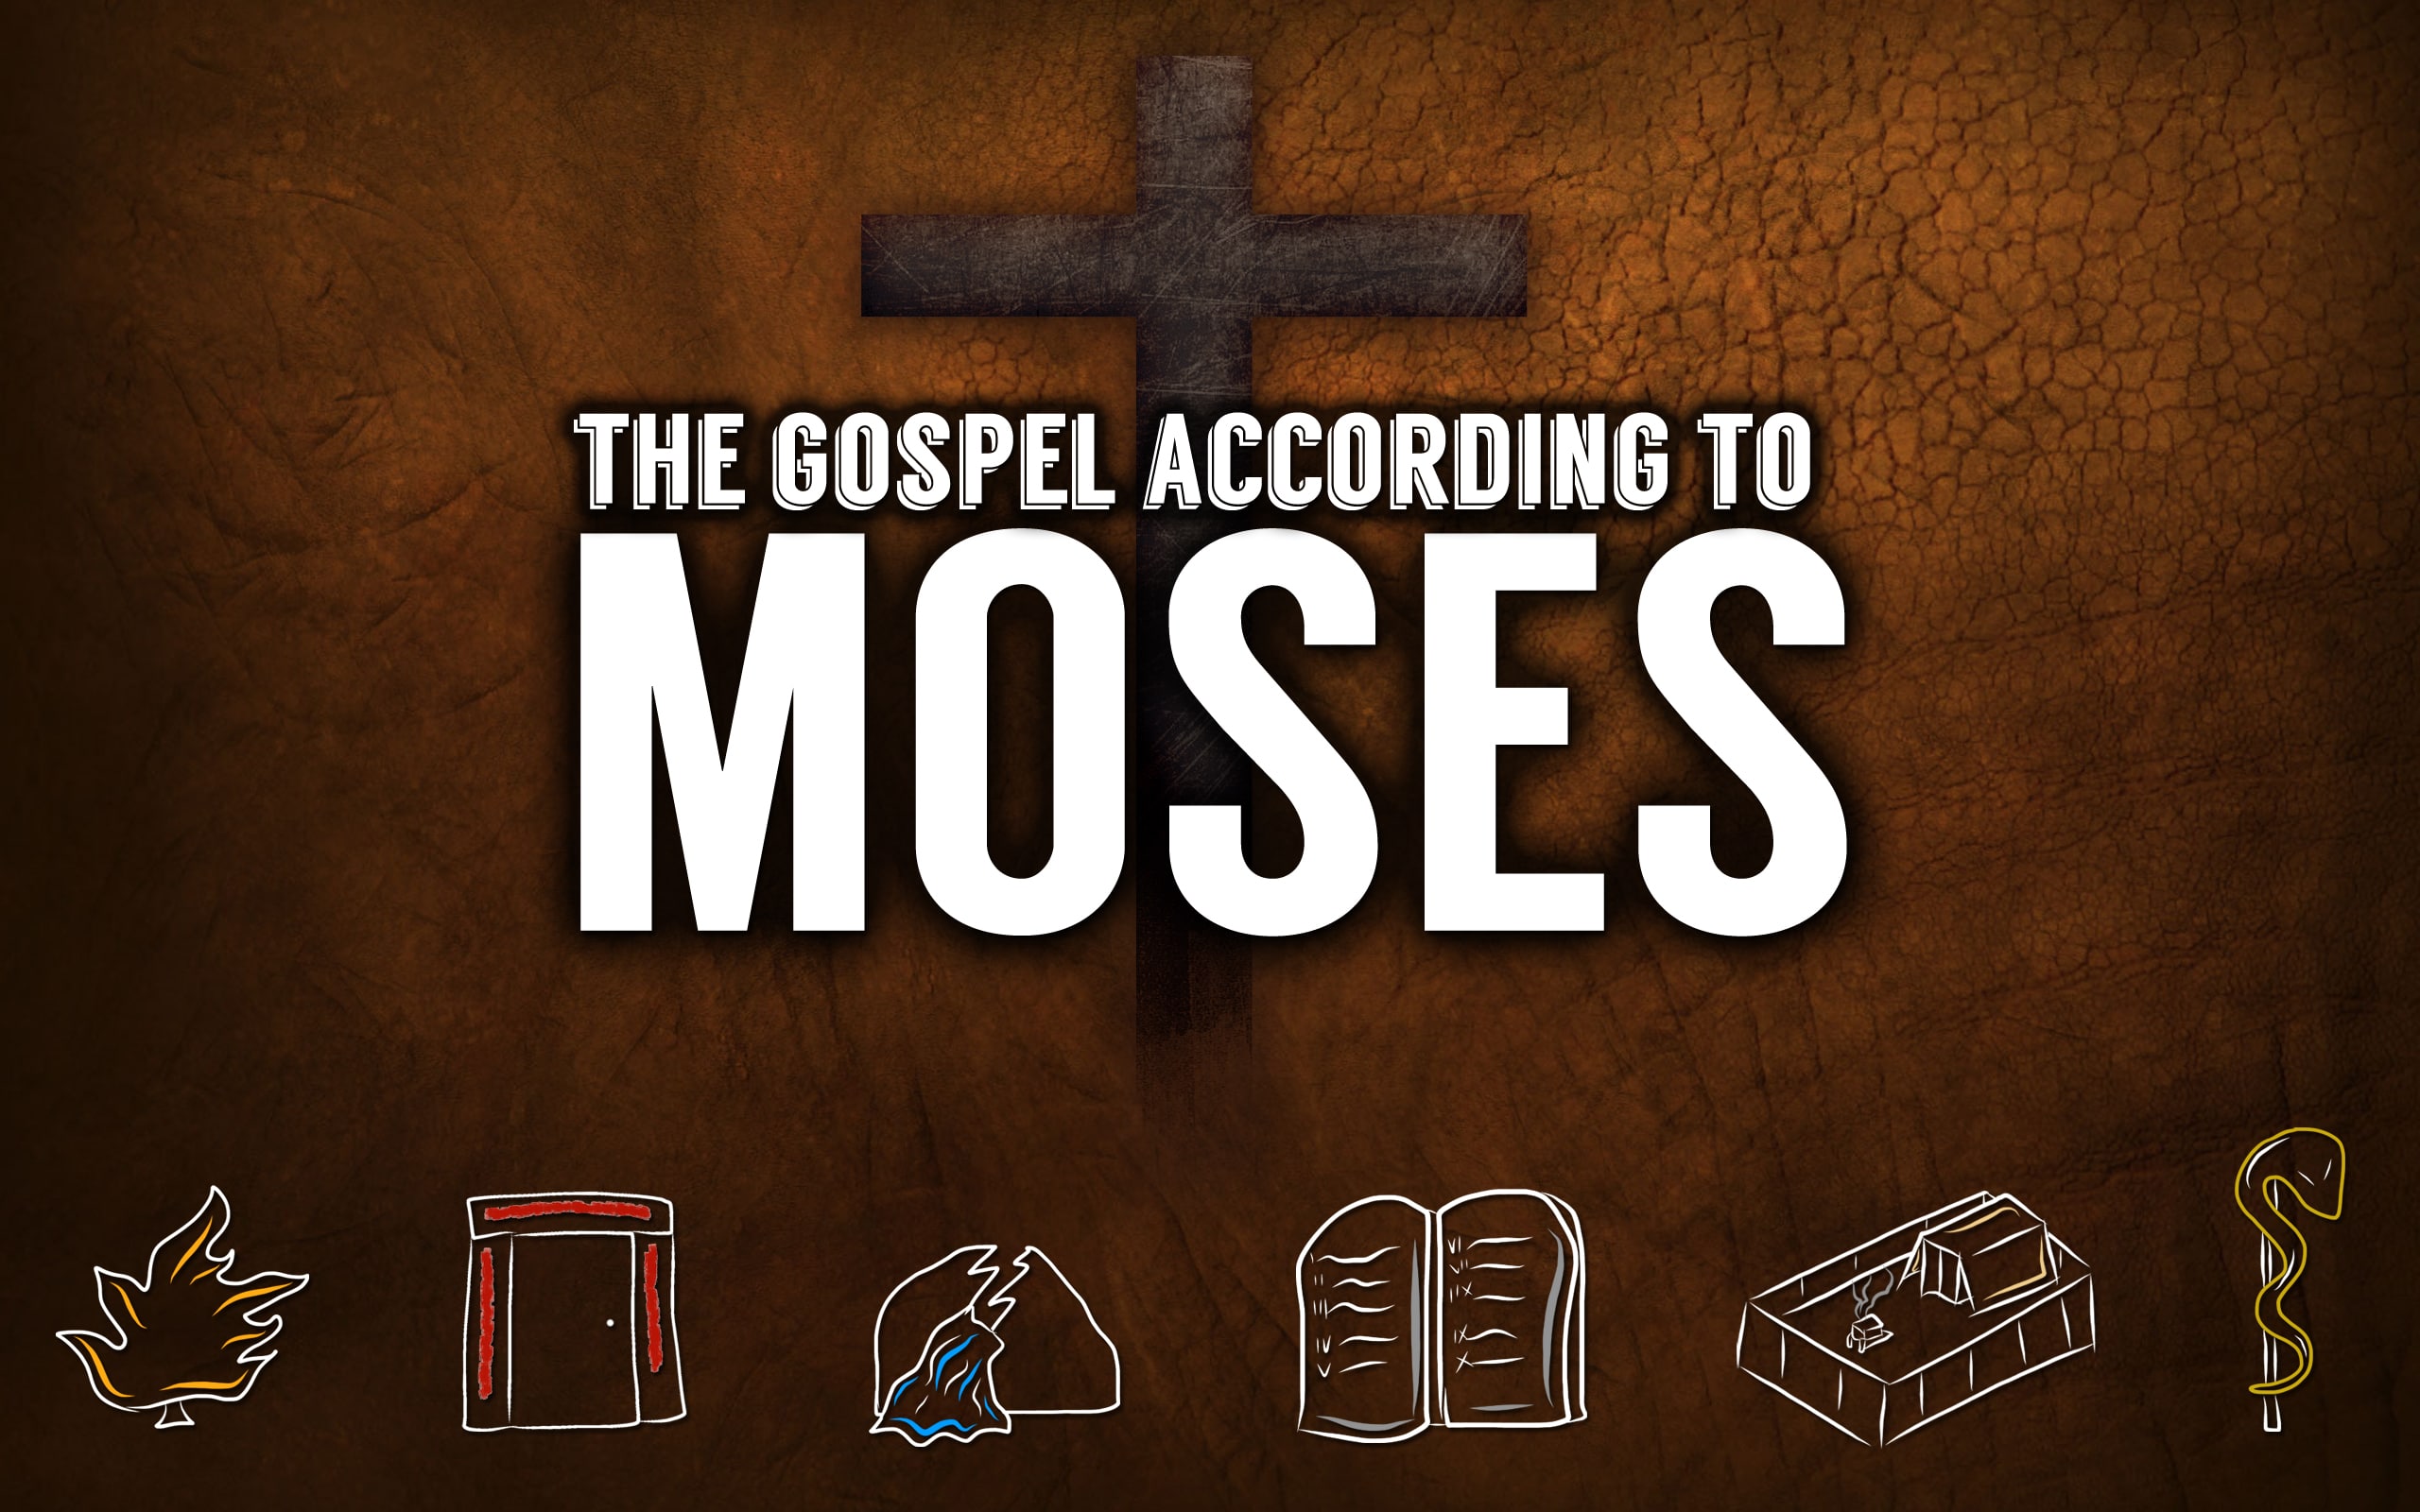 The Gospel According to Moses